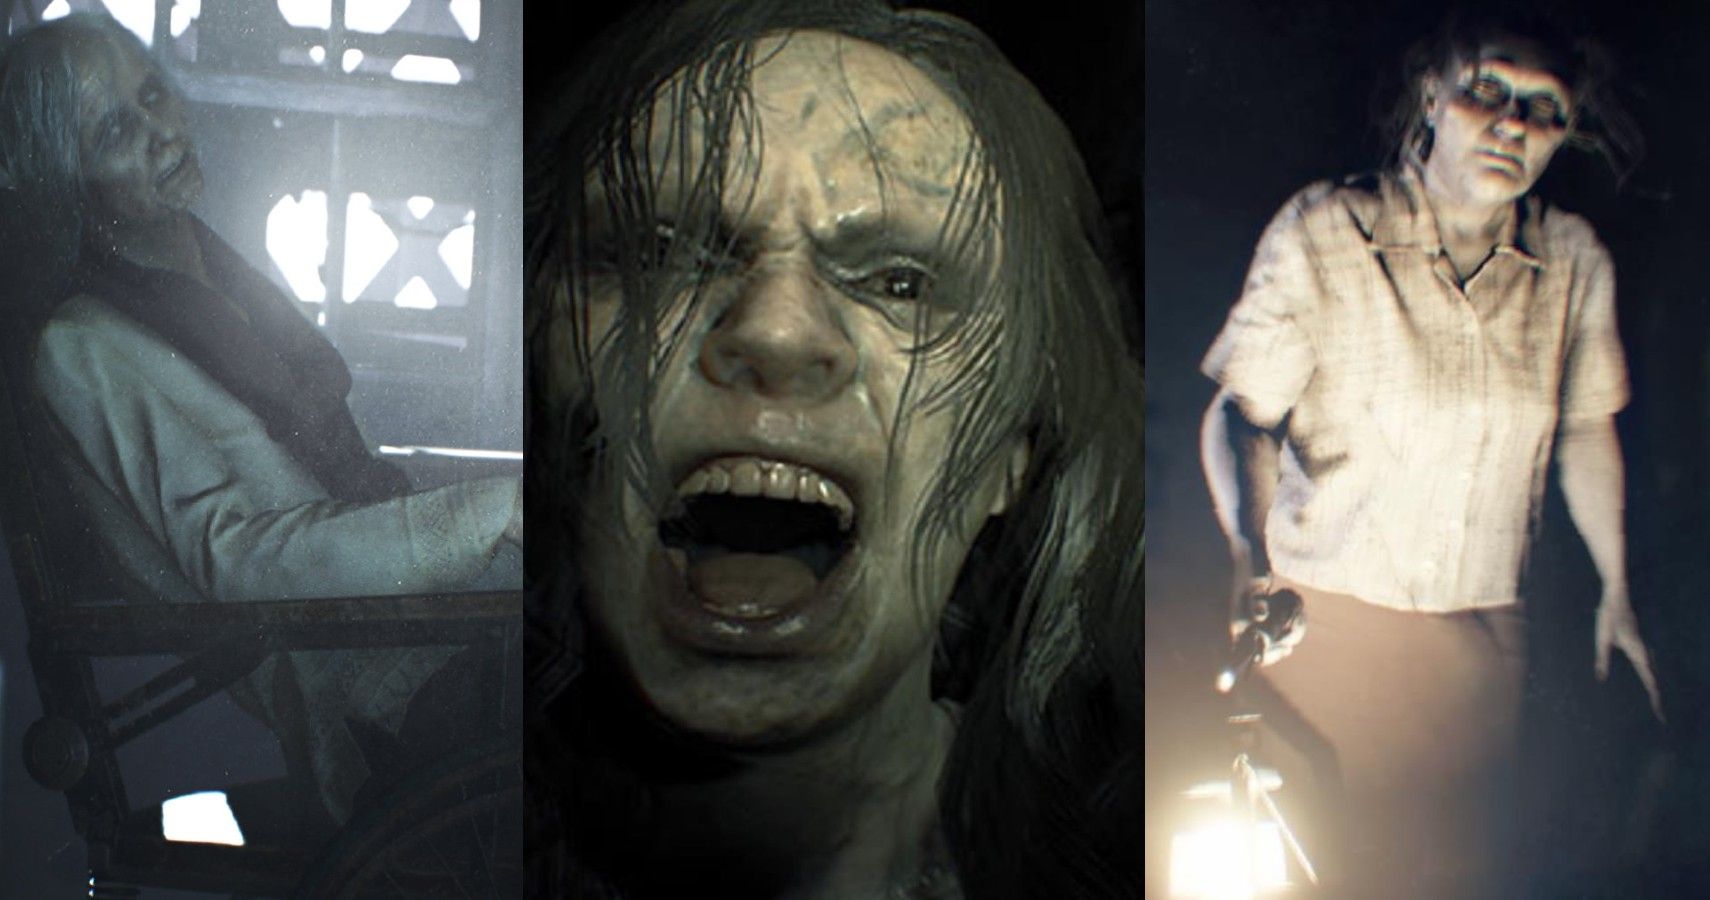 The 7 Most Memorable Moments In Resident Evil History